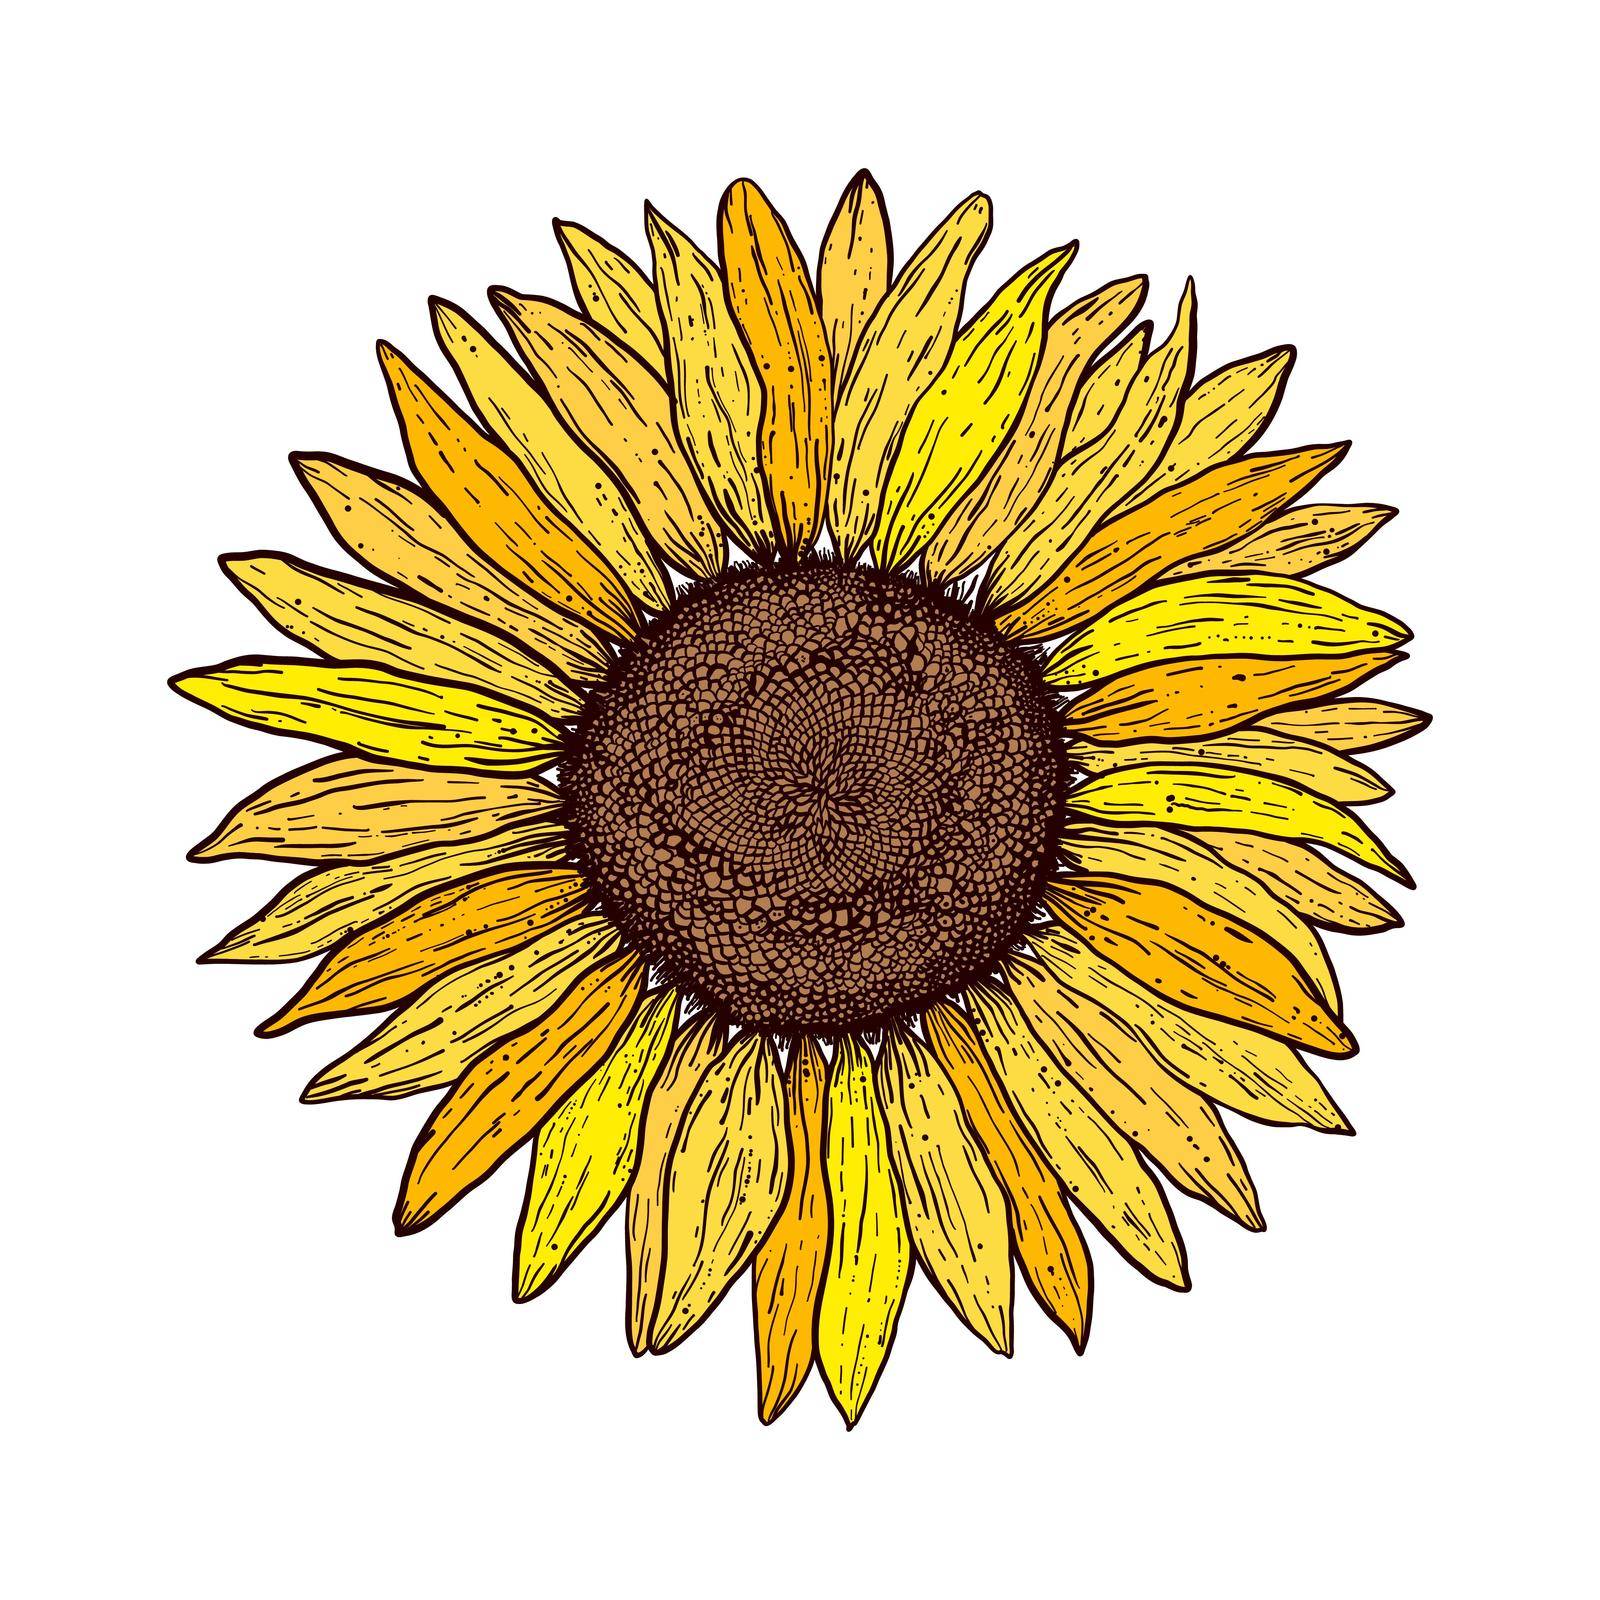 Sunflower in vintage engraving style on white background.